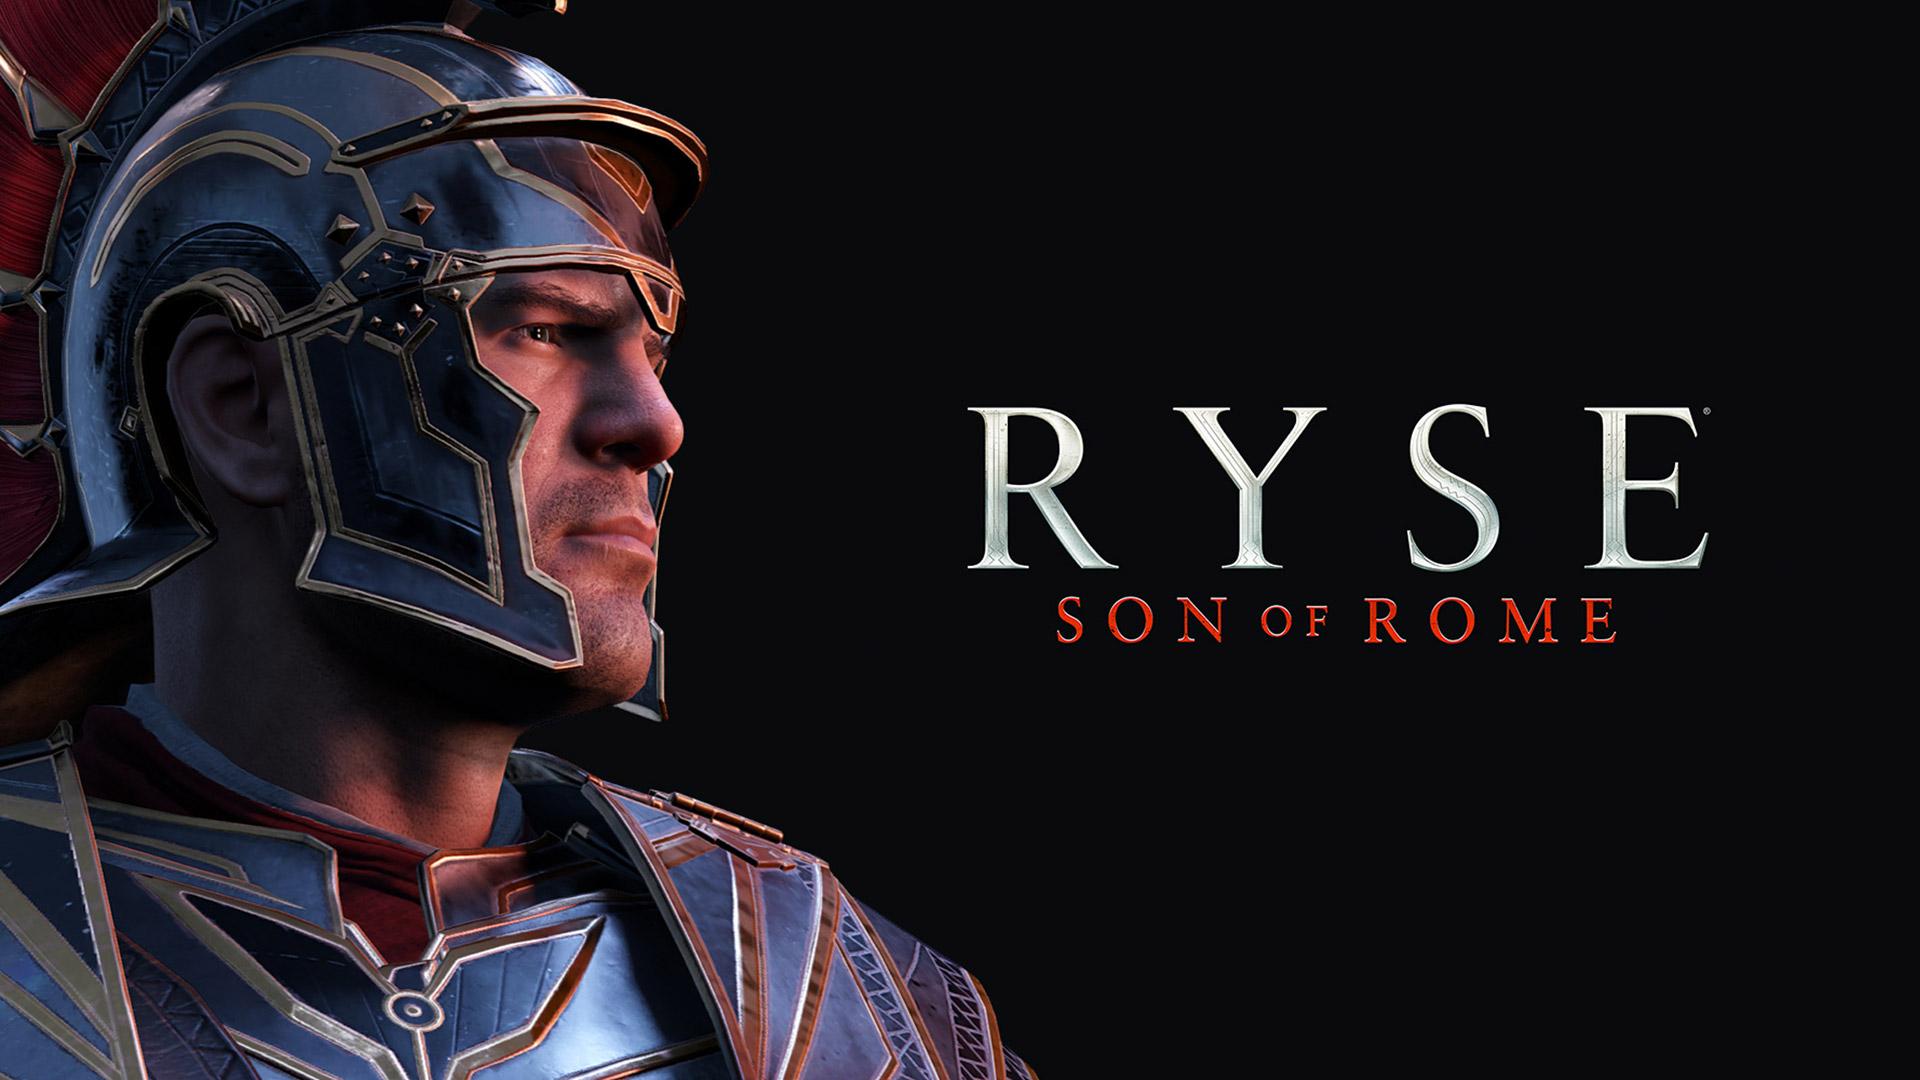 Ryse son of rome on steam фото 14